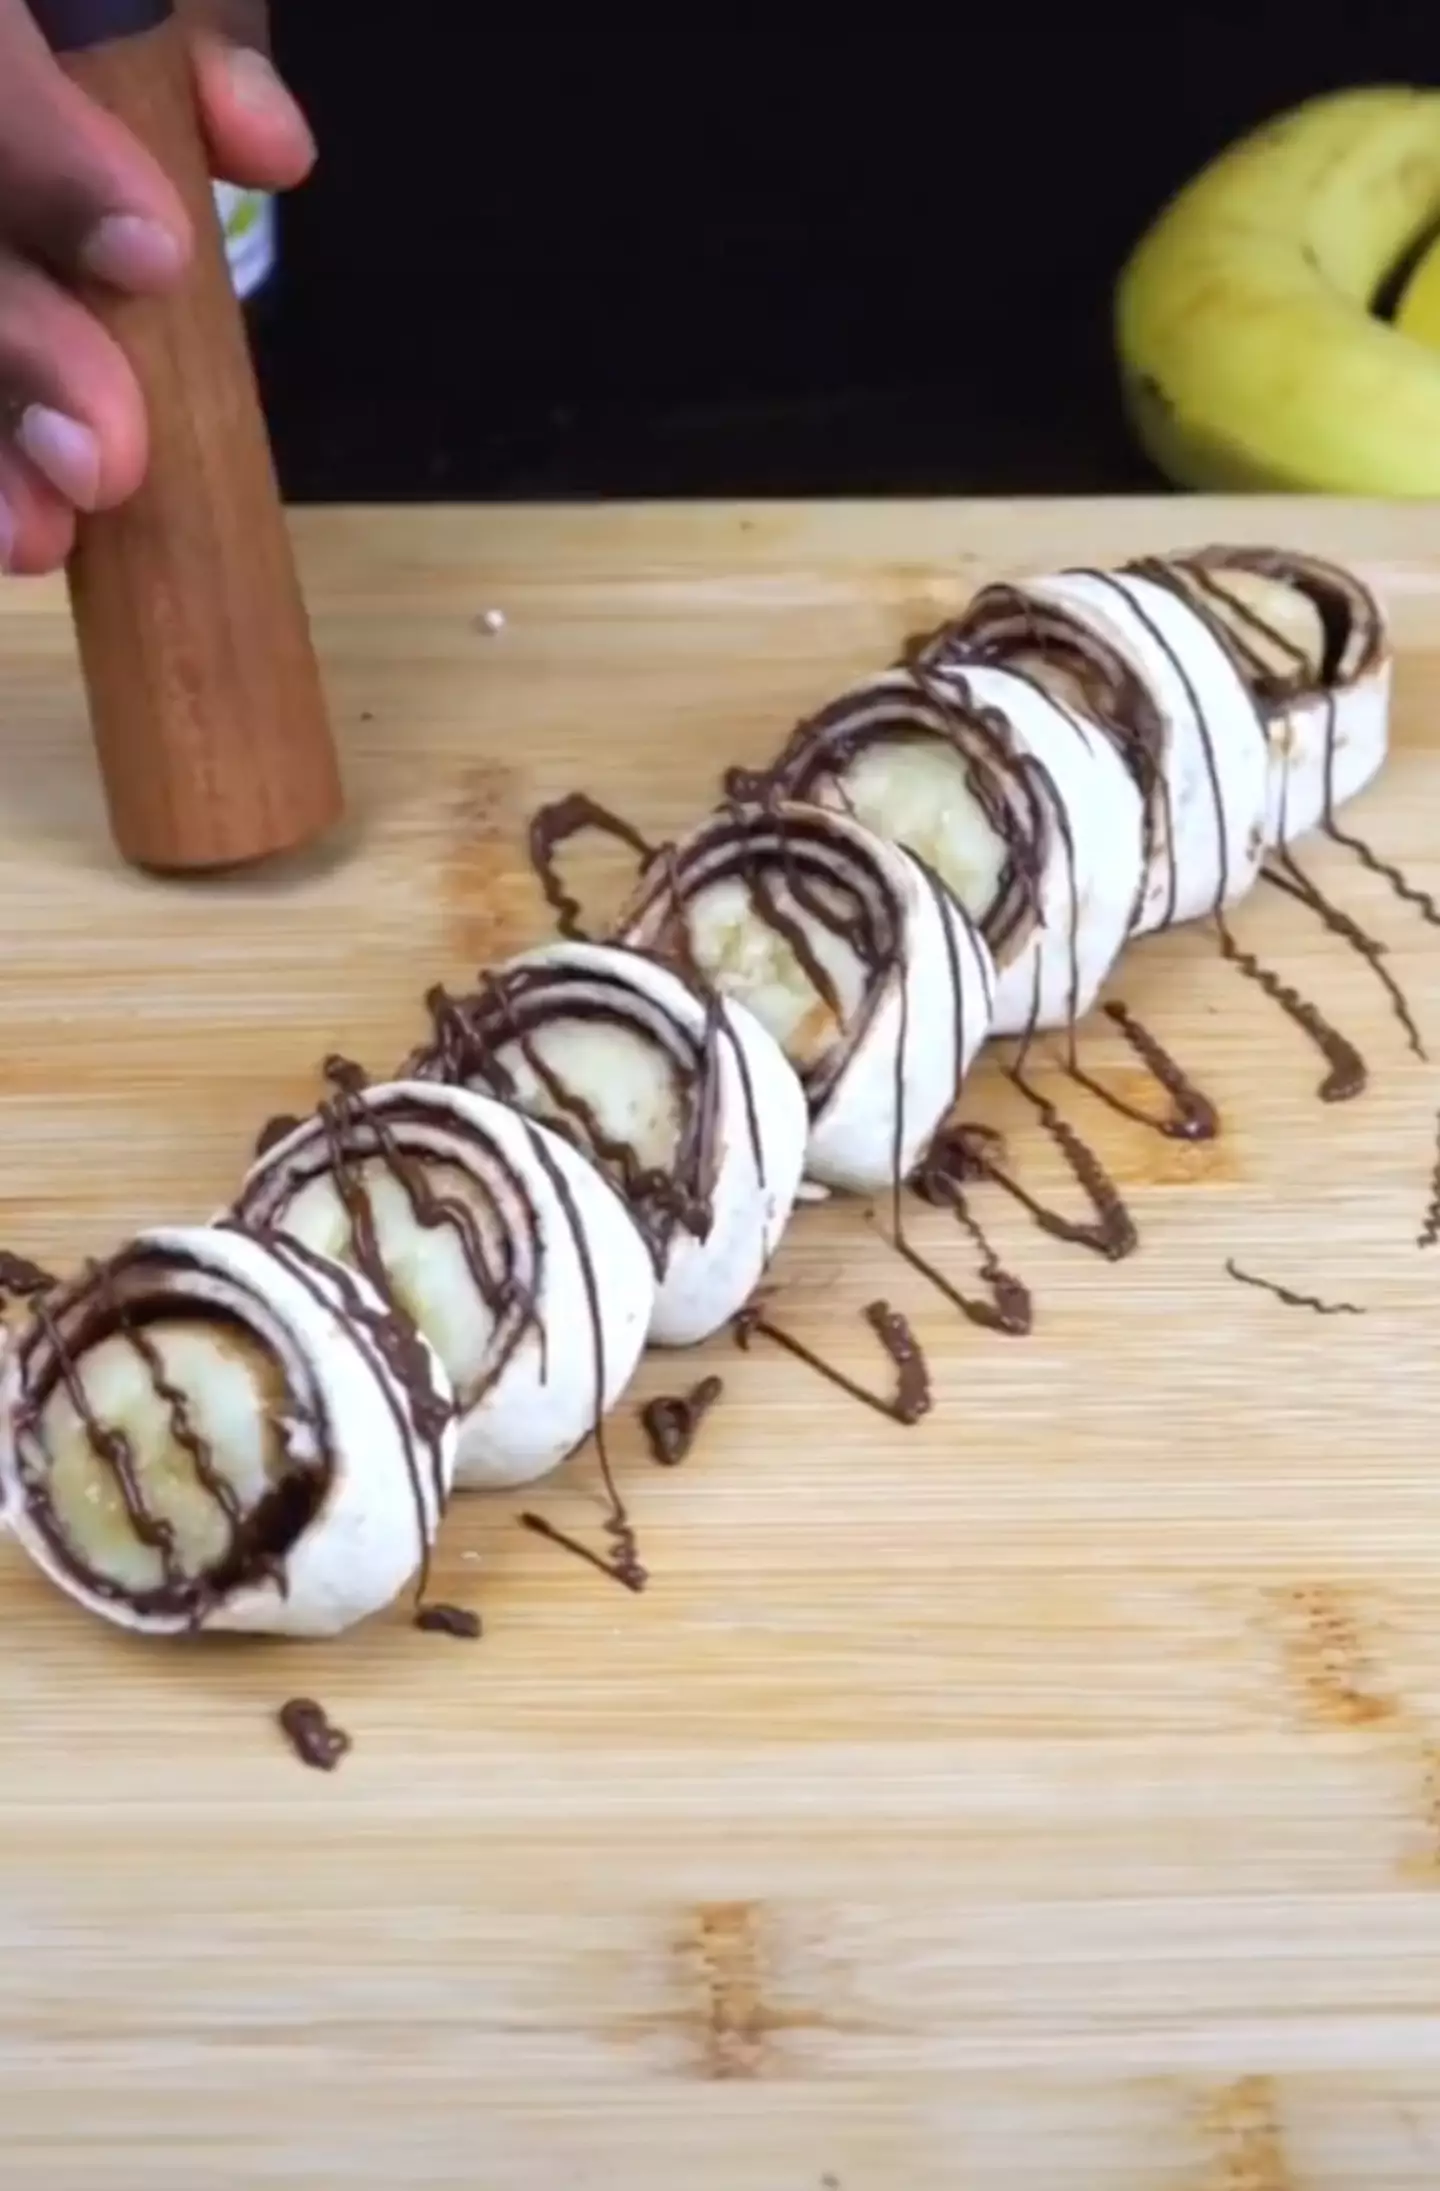 Why not make your banana sushi with Nutella? (